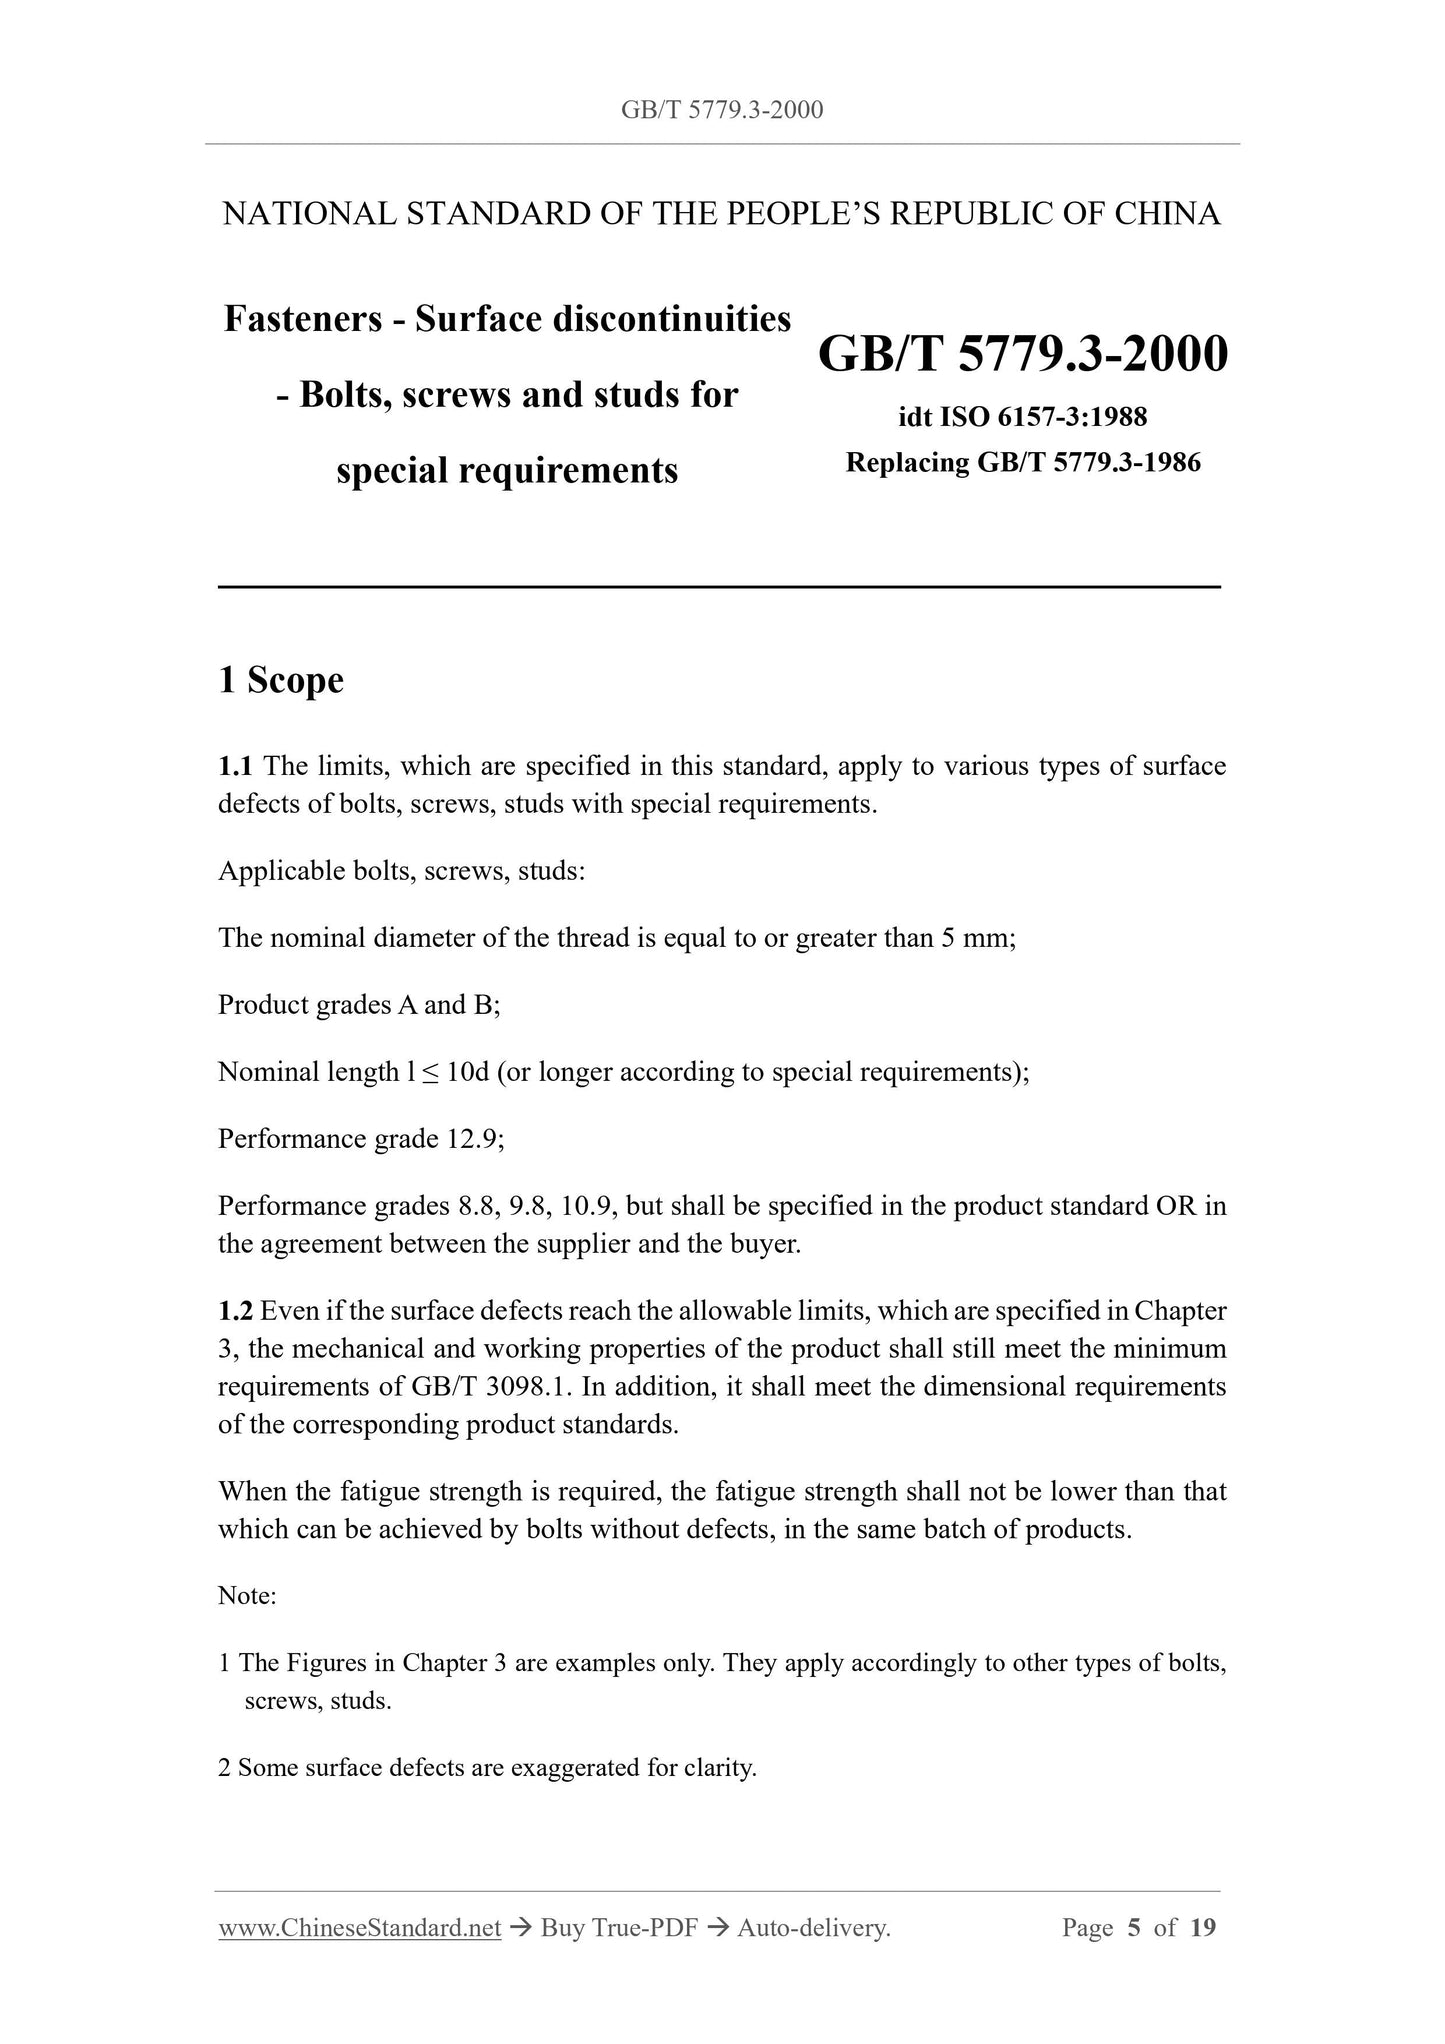 GB/T 5779.3-2000 Page 3